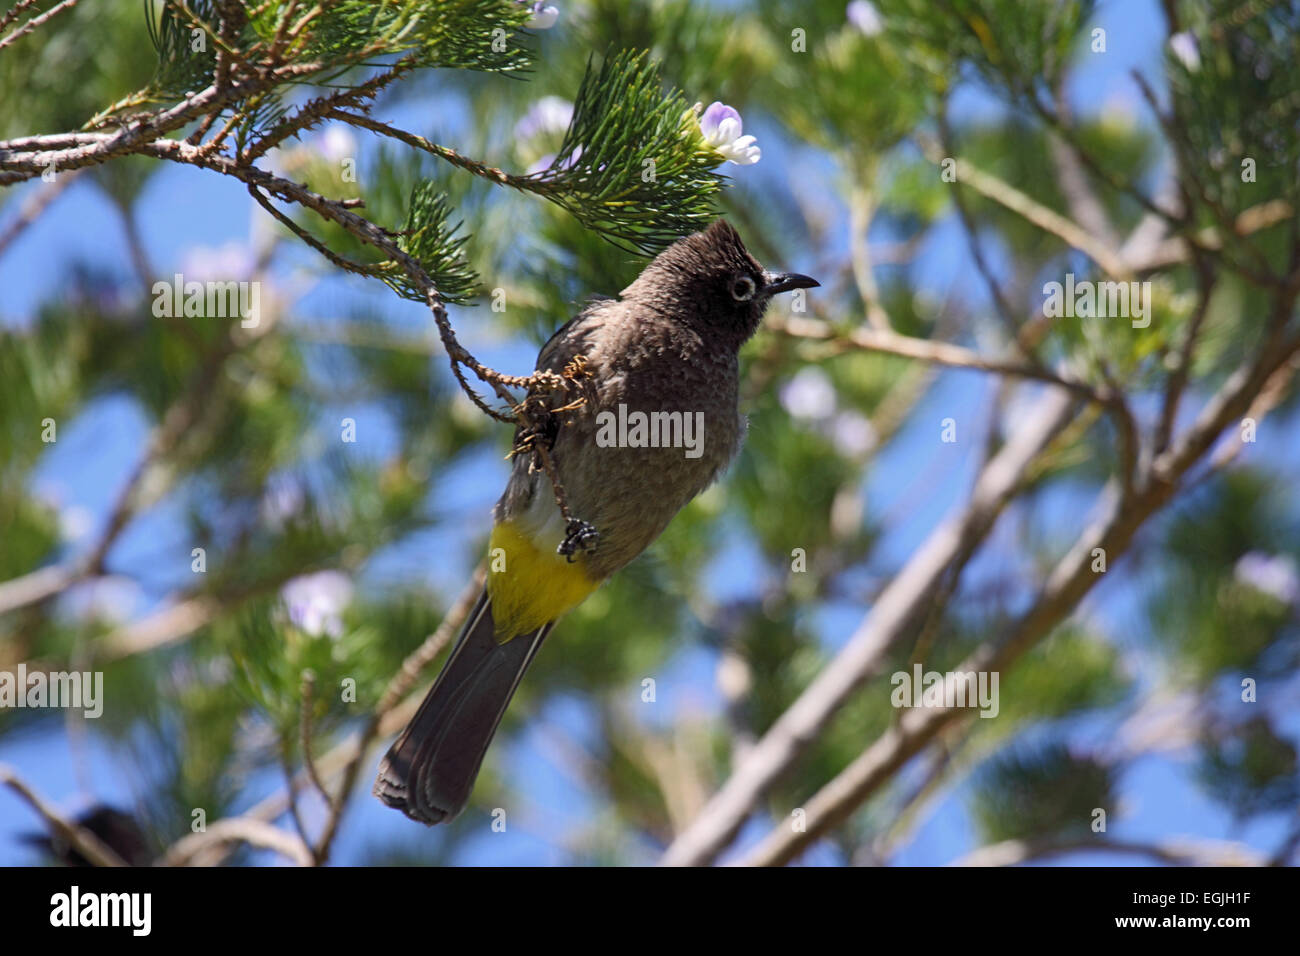 Cape bulbul perched in tree in South Africa Stock Photo